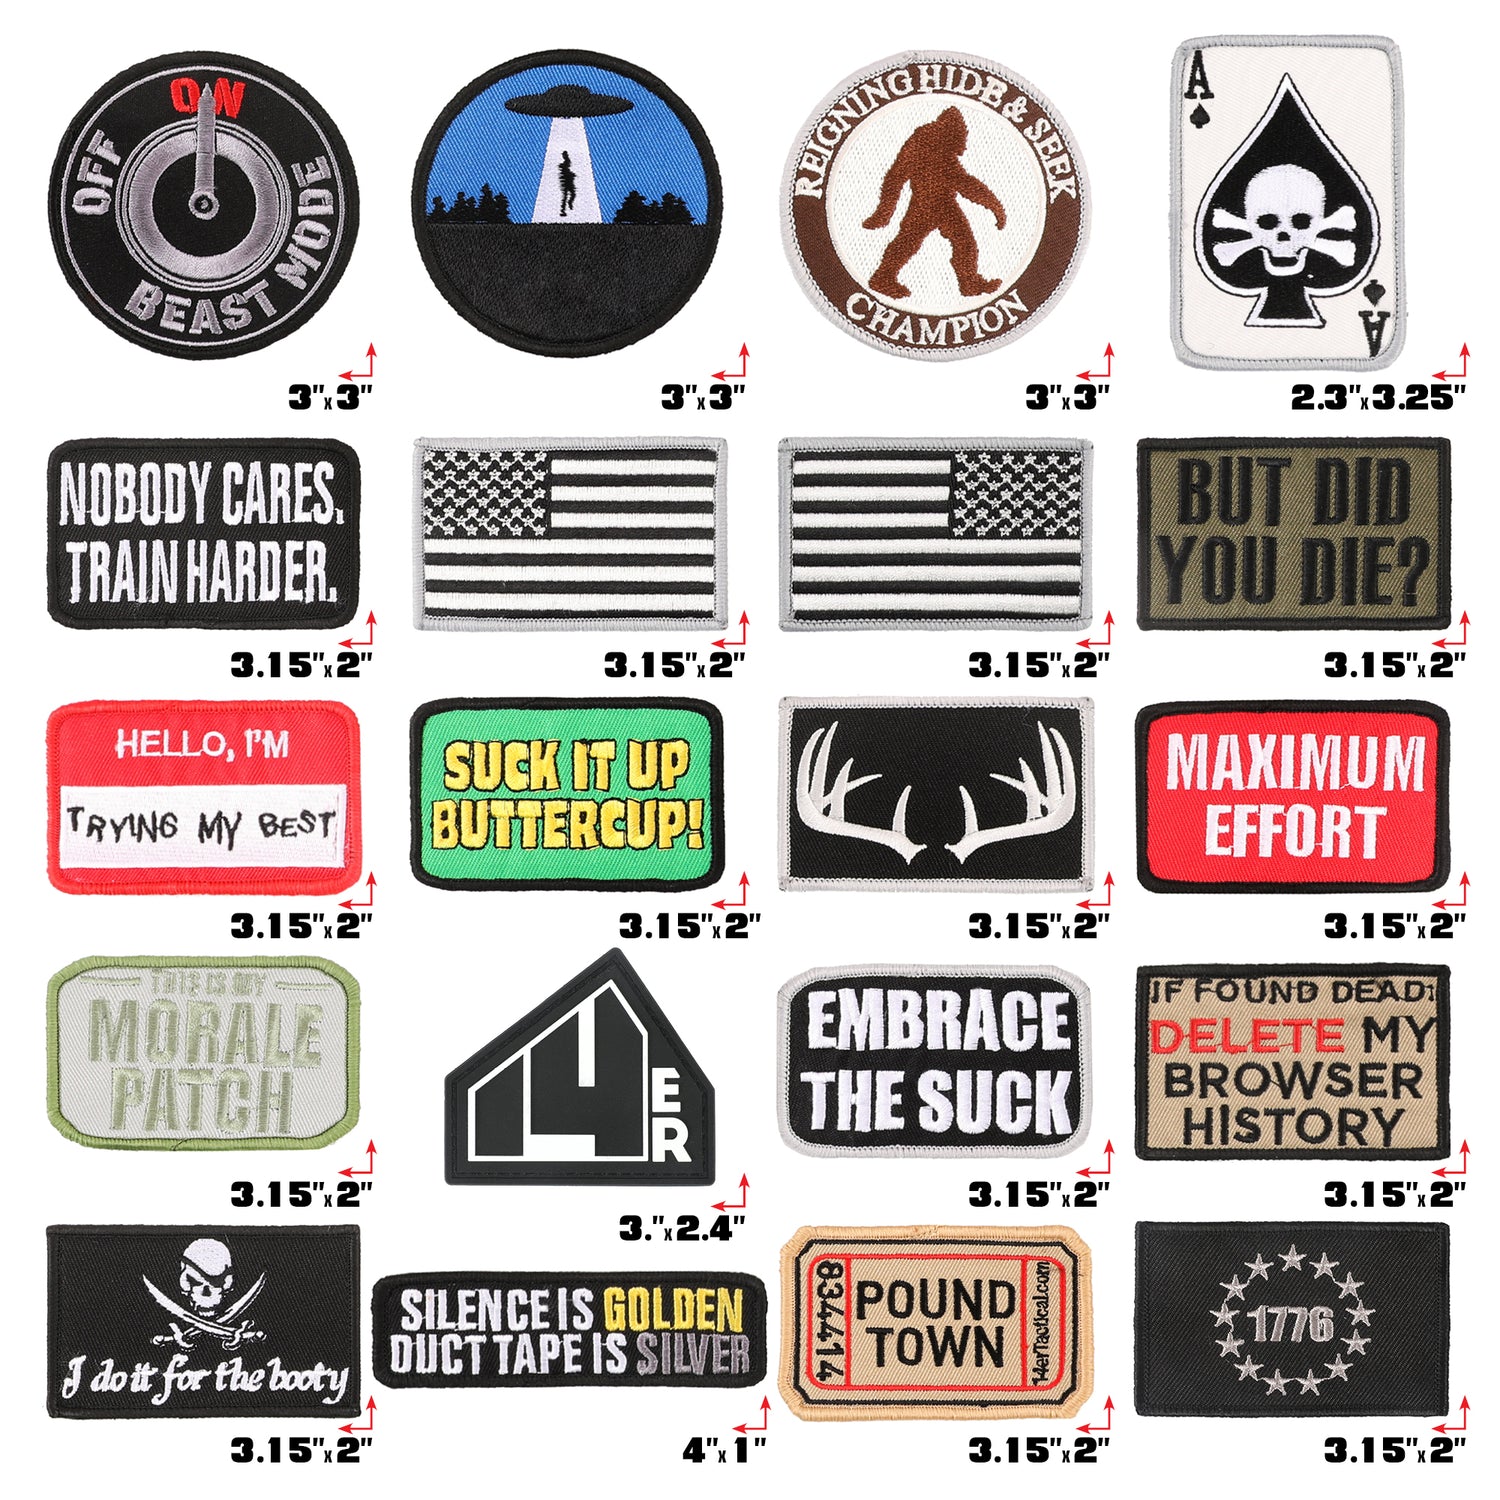 Custom Tactical Patches for Military, Law Enforcement, and Outdoor